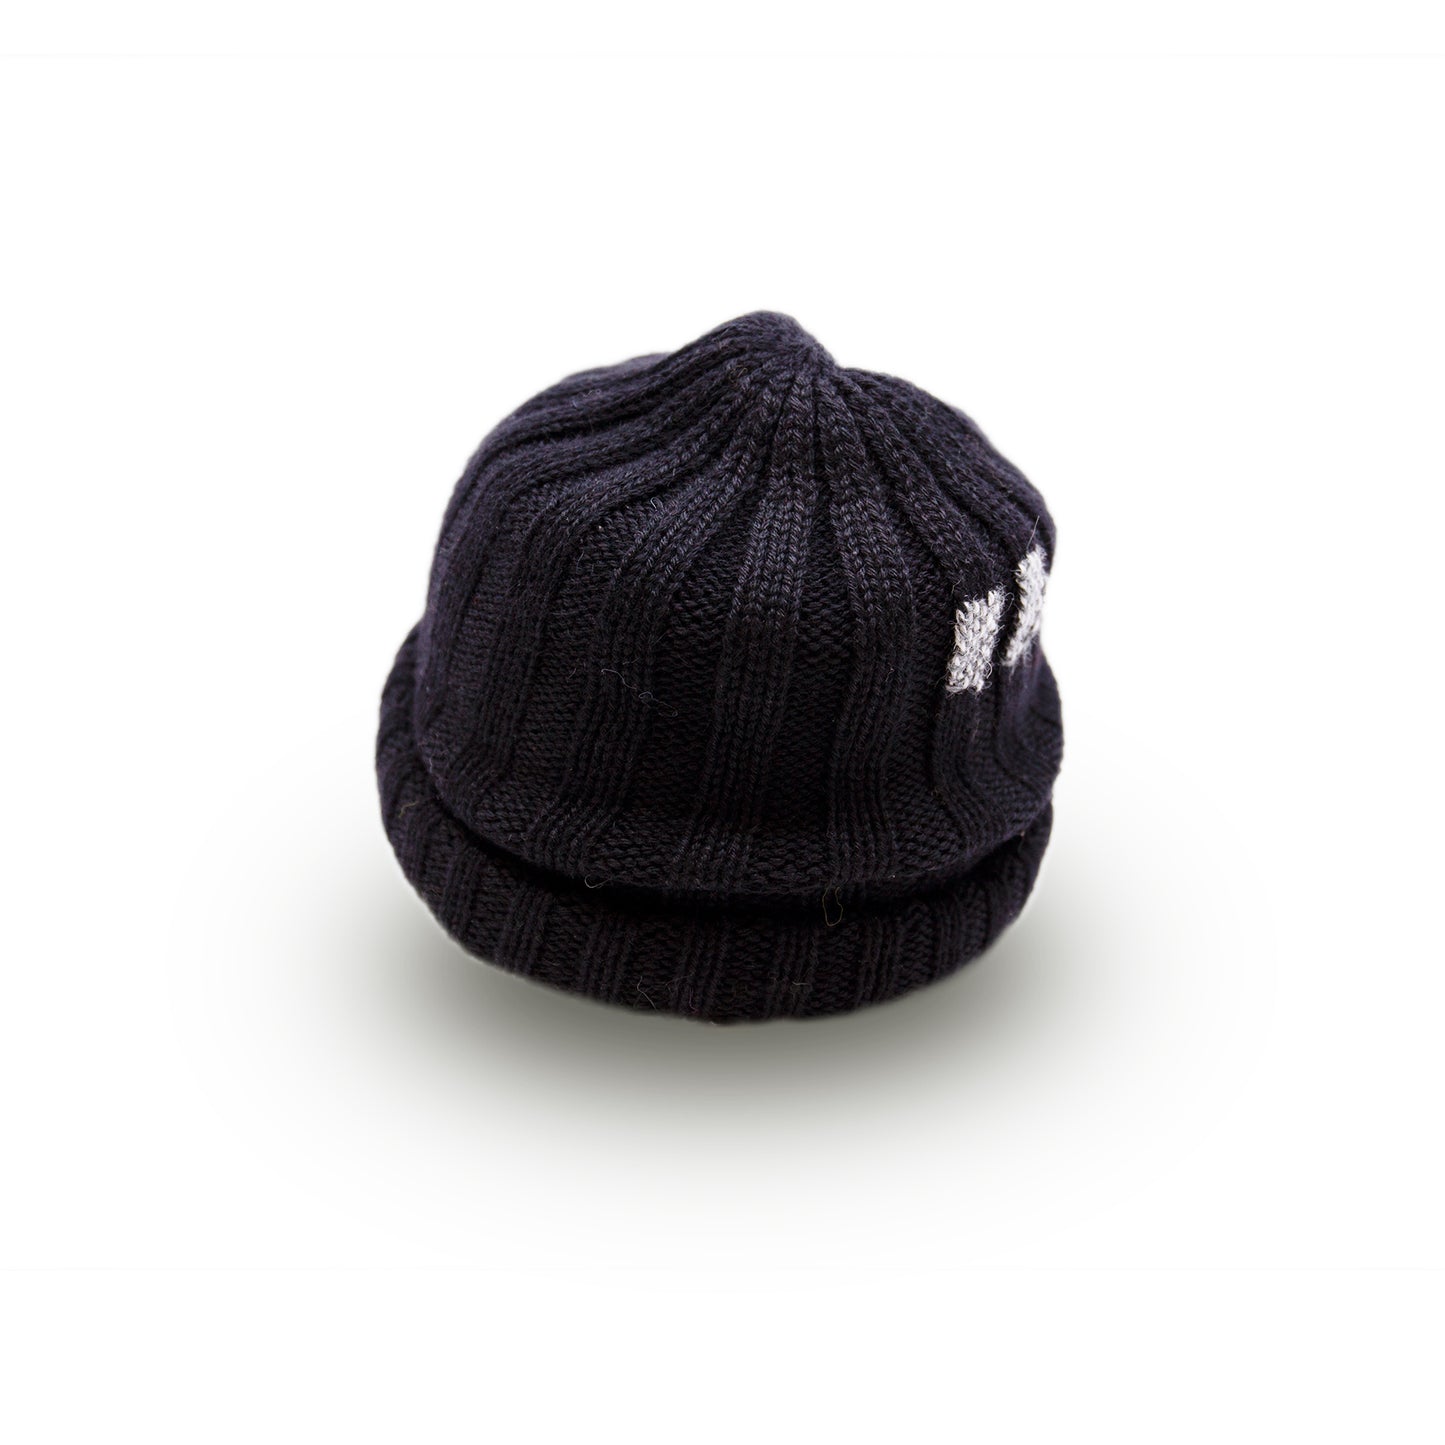 100% baby alpaca wool ribbed beanie in Burnt Charcoal  Multicolored hand-embroidered mending  Made in Los Angeles